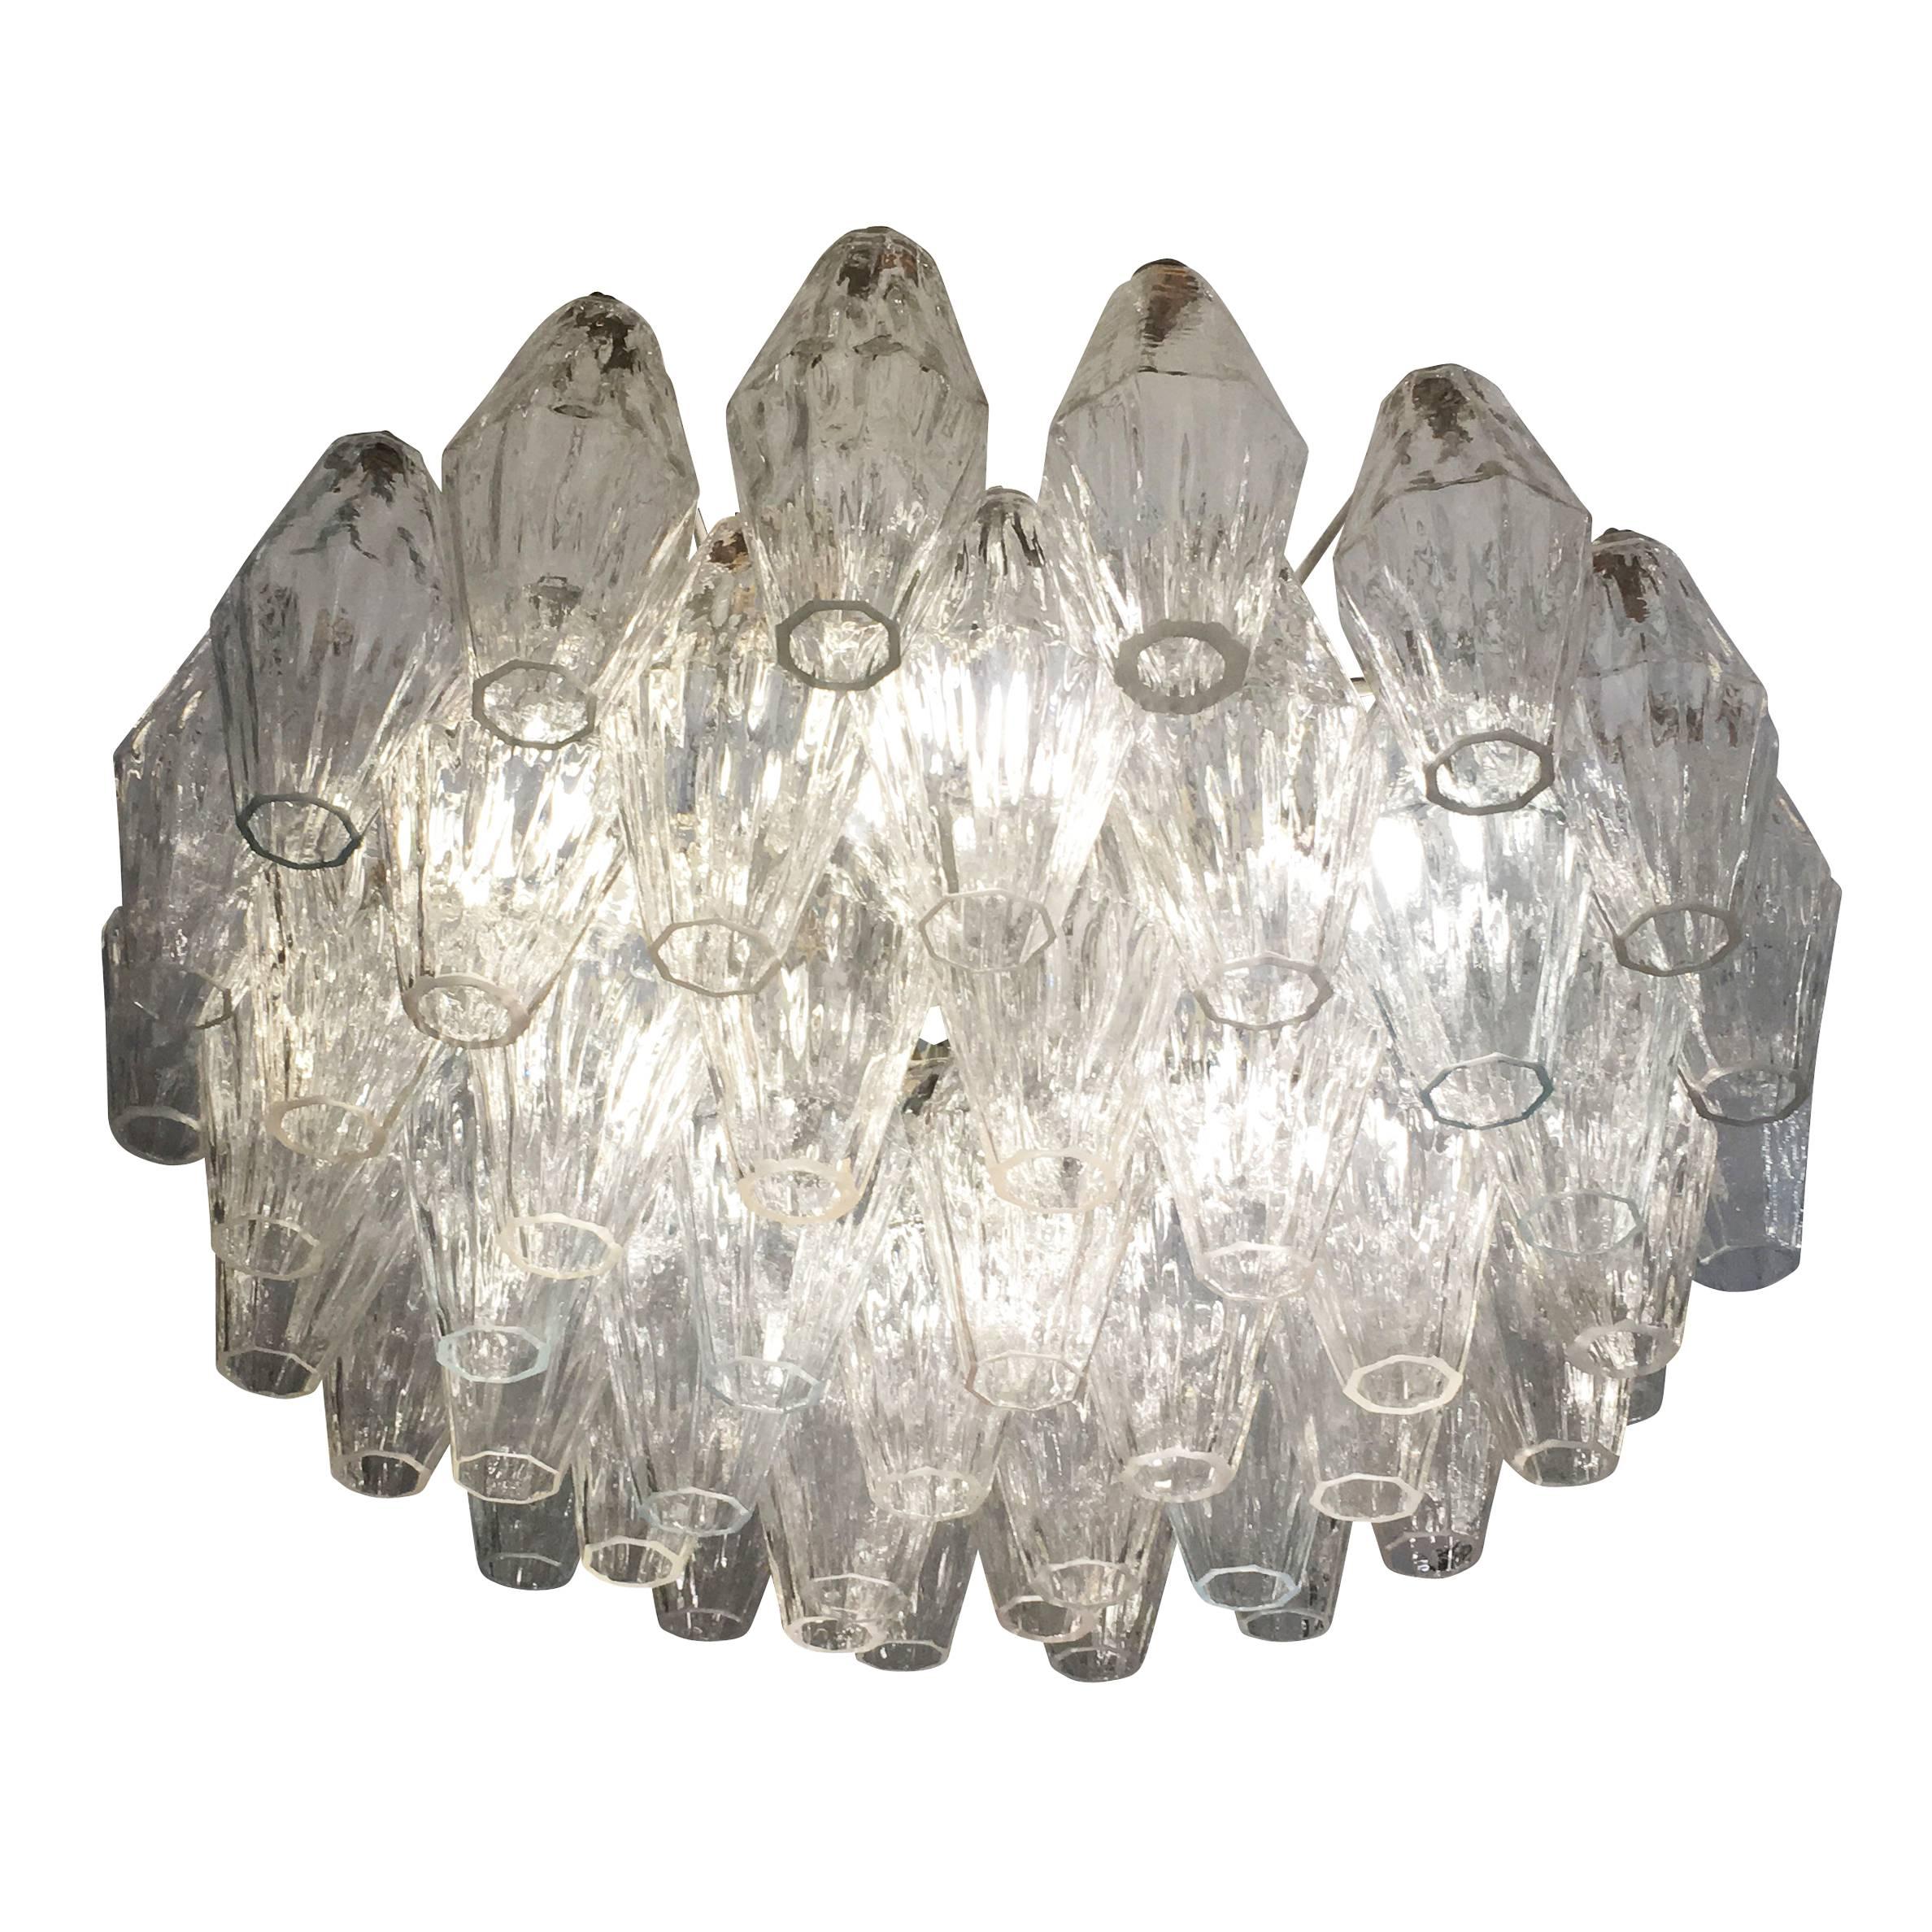 Murano glass poliedri chandelier attributed to Venini. Each glass, handblown in a mold, is clear with a textured surface. The glasses are larger in size than those seen on most of these chandeliers. The frame is white and holds six regular sockets.